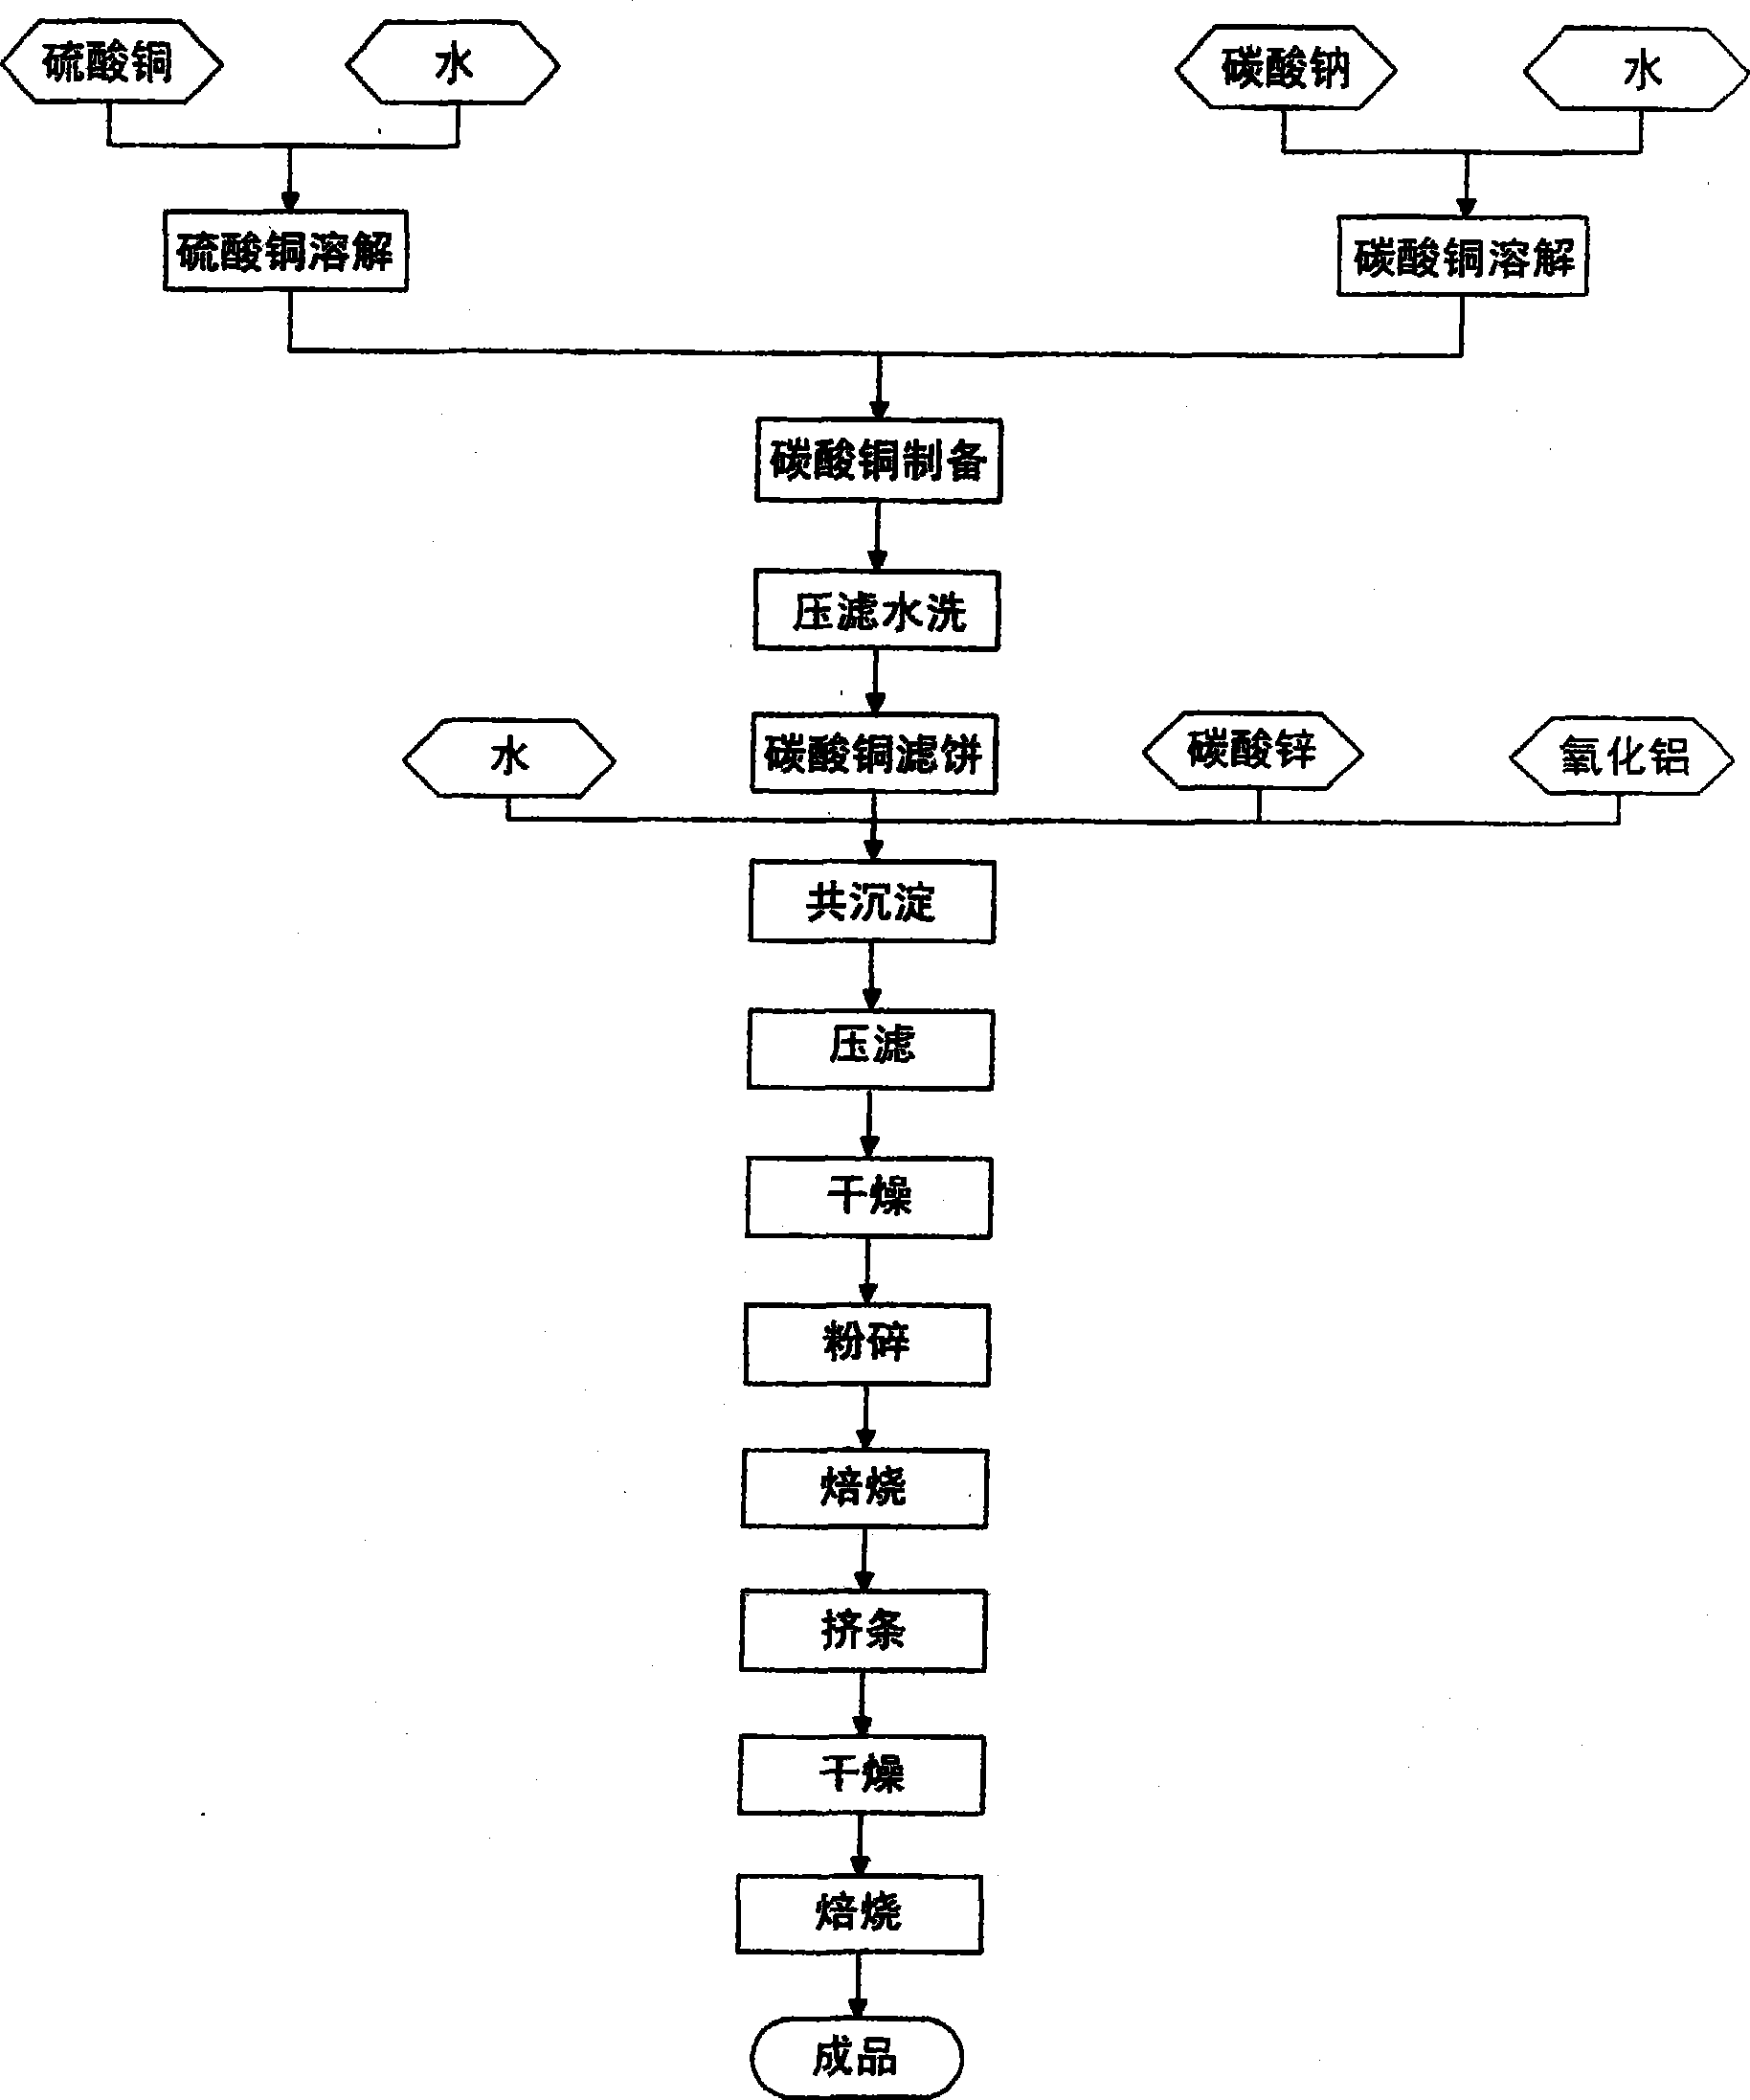 Production method of dearsenic agent